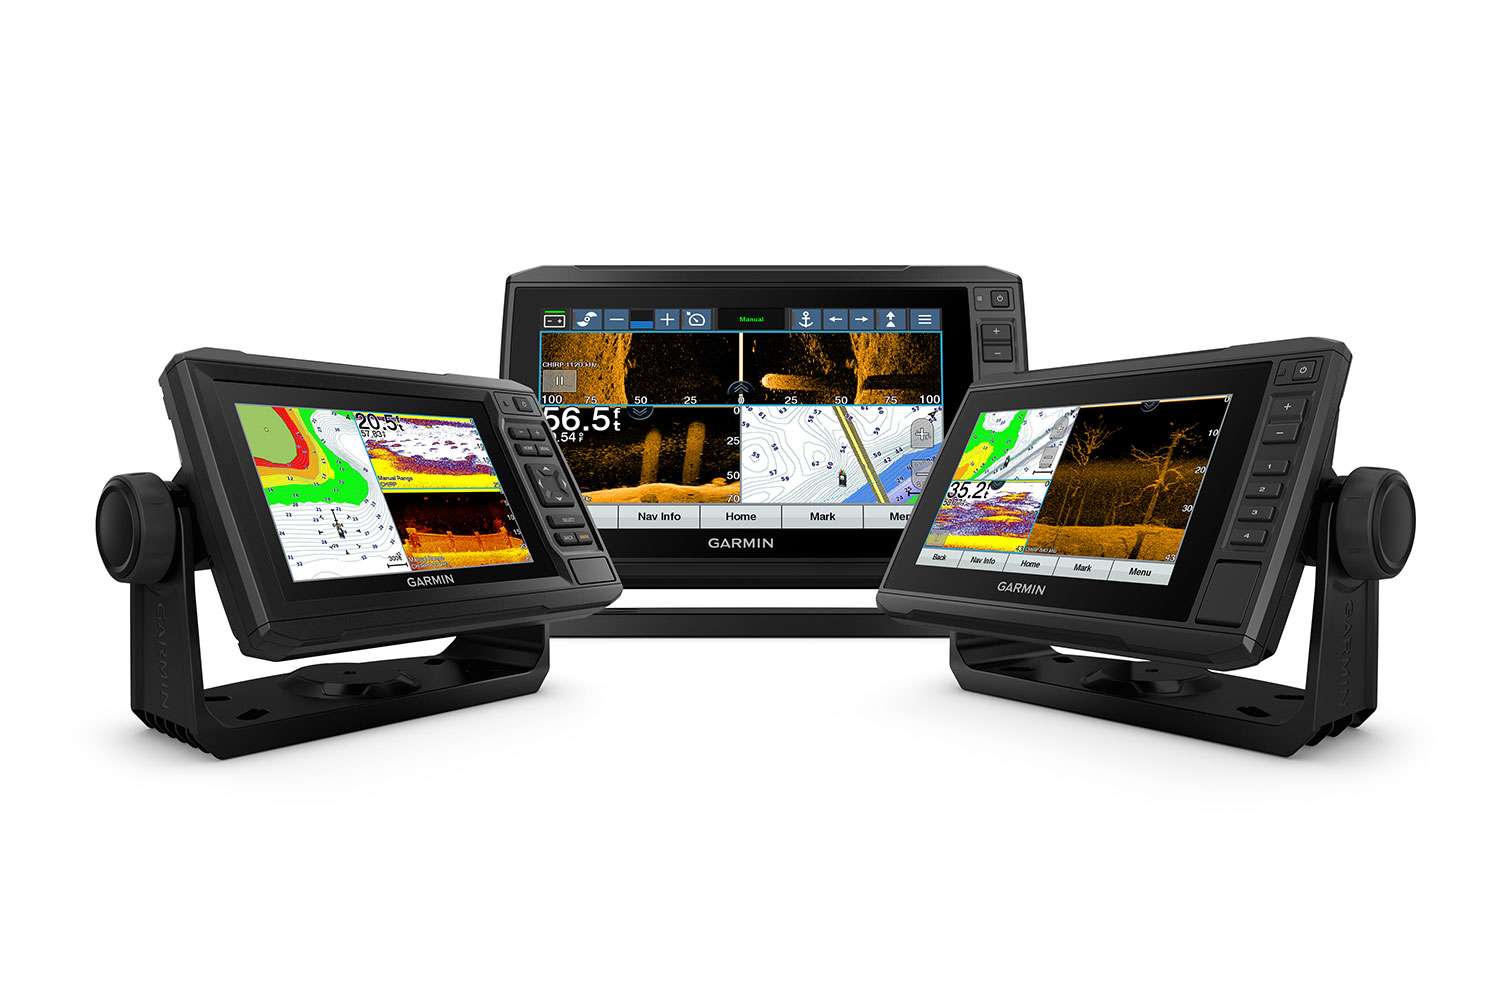 <p><b>Garmin EchoMap UHD series</b></p>
The 6-, 7- and 9-inch Garmin EchoMap UHD series chartplotters are preloaded with highly detailed LakeVÃ¼ g3 inland maps with Navionics data and include Quickdraw Contours map drawing software. The ECHOMAP UHD âsvâ combos are available with 7- and 9-inch keyed-assist touchscreen displays and include a transducer for high-wide CHIRP, Ultra High-Definition ClearVÃ¼ and SideVÃ¼ scanning sonar. The EchoMap UHD âcvâ combos are available with 6-inch keyed or 7-inch keyed-assist touchscreen displays and includes transducer for Ultra High- Definition ClearVÃ¼ scanning sonar. All 7- and 9-inch models support the Panoptix LiveScope System, and all models have built-in Wi-Fi to pair with the free ActiveCaptain app for access to OneChart to purchase and download new charts, smart notifications, software updates, Garmin QuickDraw Community data and more. They also feature a quick-release bail mount for easy removal. The EchoMap UHD 7- and 9-inch combos are also compatible with the Garmin Force trolling motor for full control of the motor from the chartplotter screen, including the ability to route to waypoints, follow tracks and more. <br>
<p><b>MSRP: $499.99 to $1149.99</b></p>
<a href=